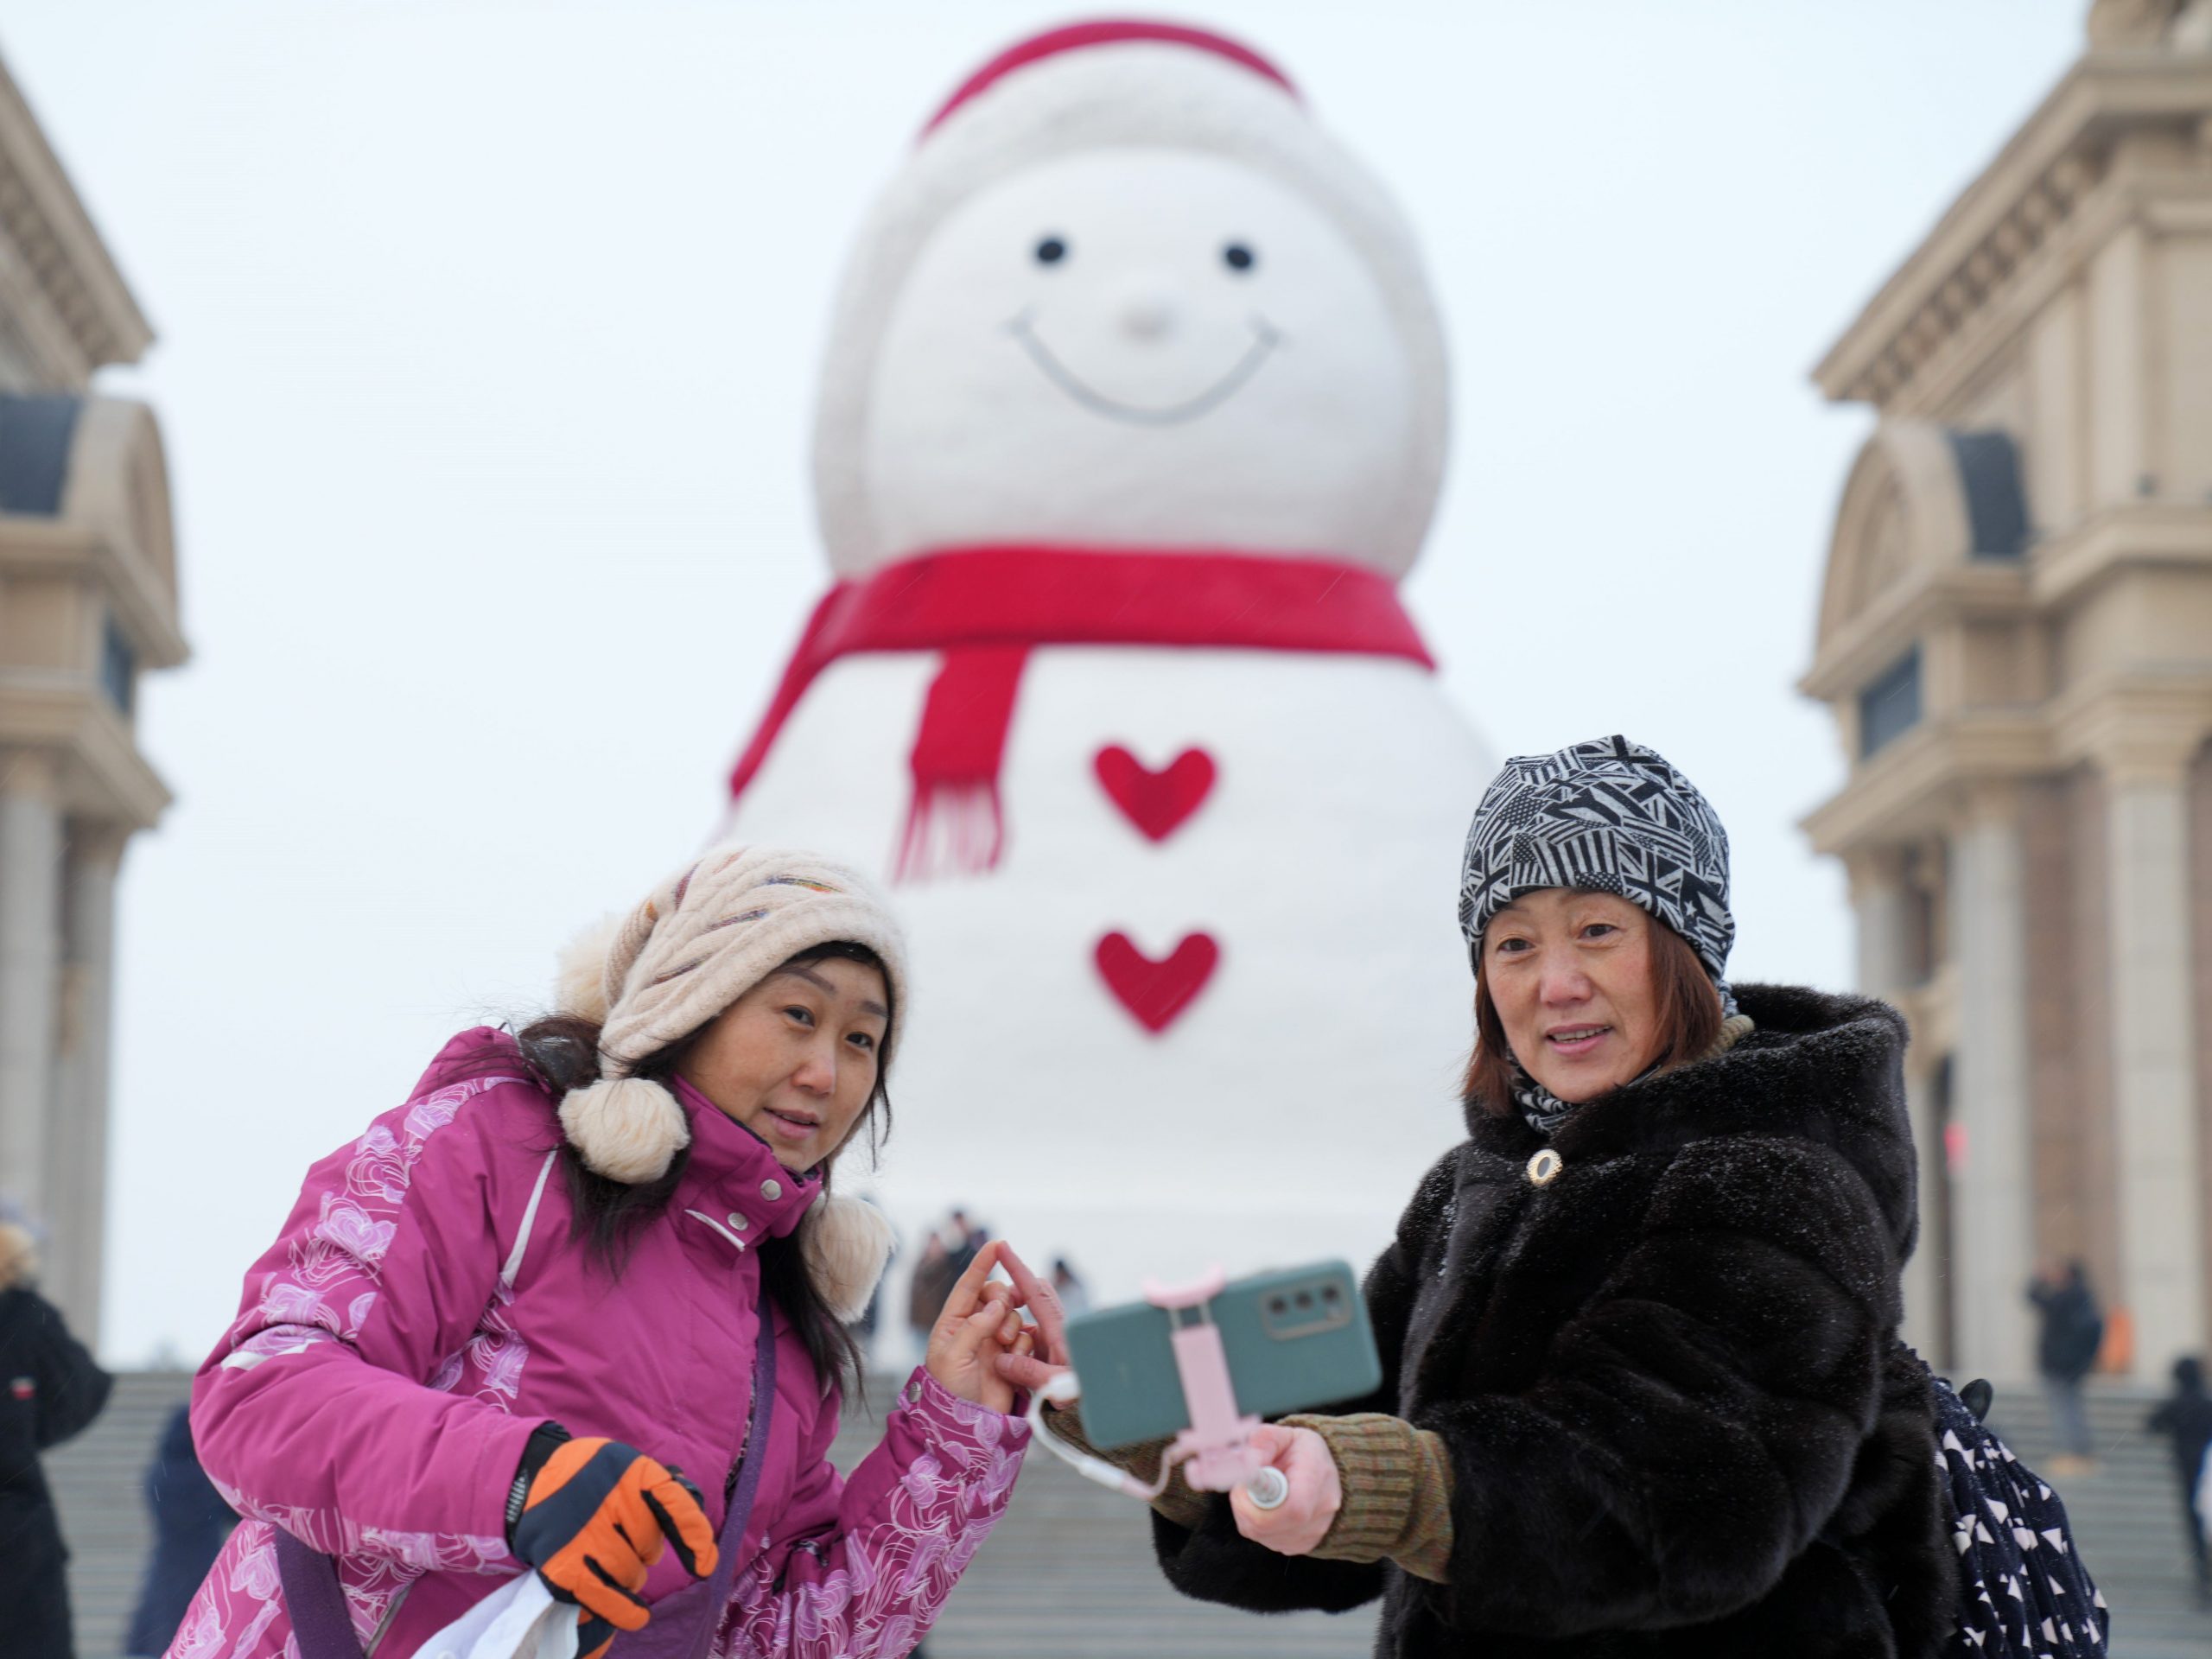 Tourists pose for photos with a huge snowman on the riverbank of Songhua River in Harbin, capital of northeast China's Heilongjiang Province, Jan. 9, 2022.